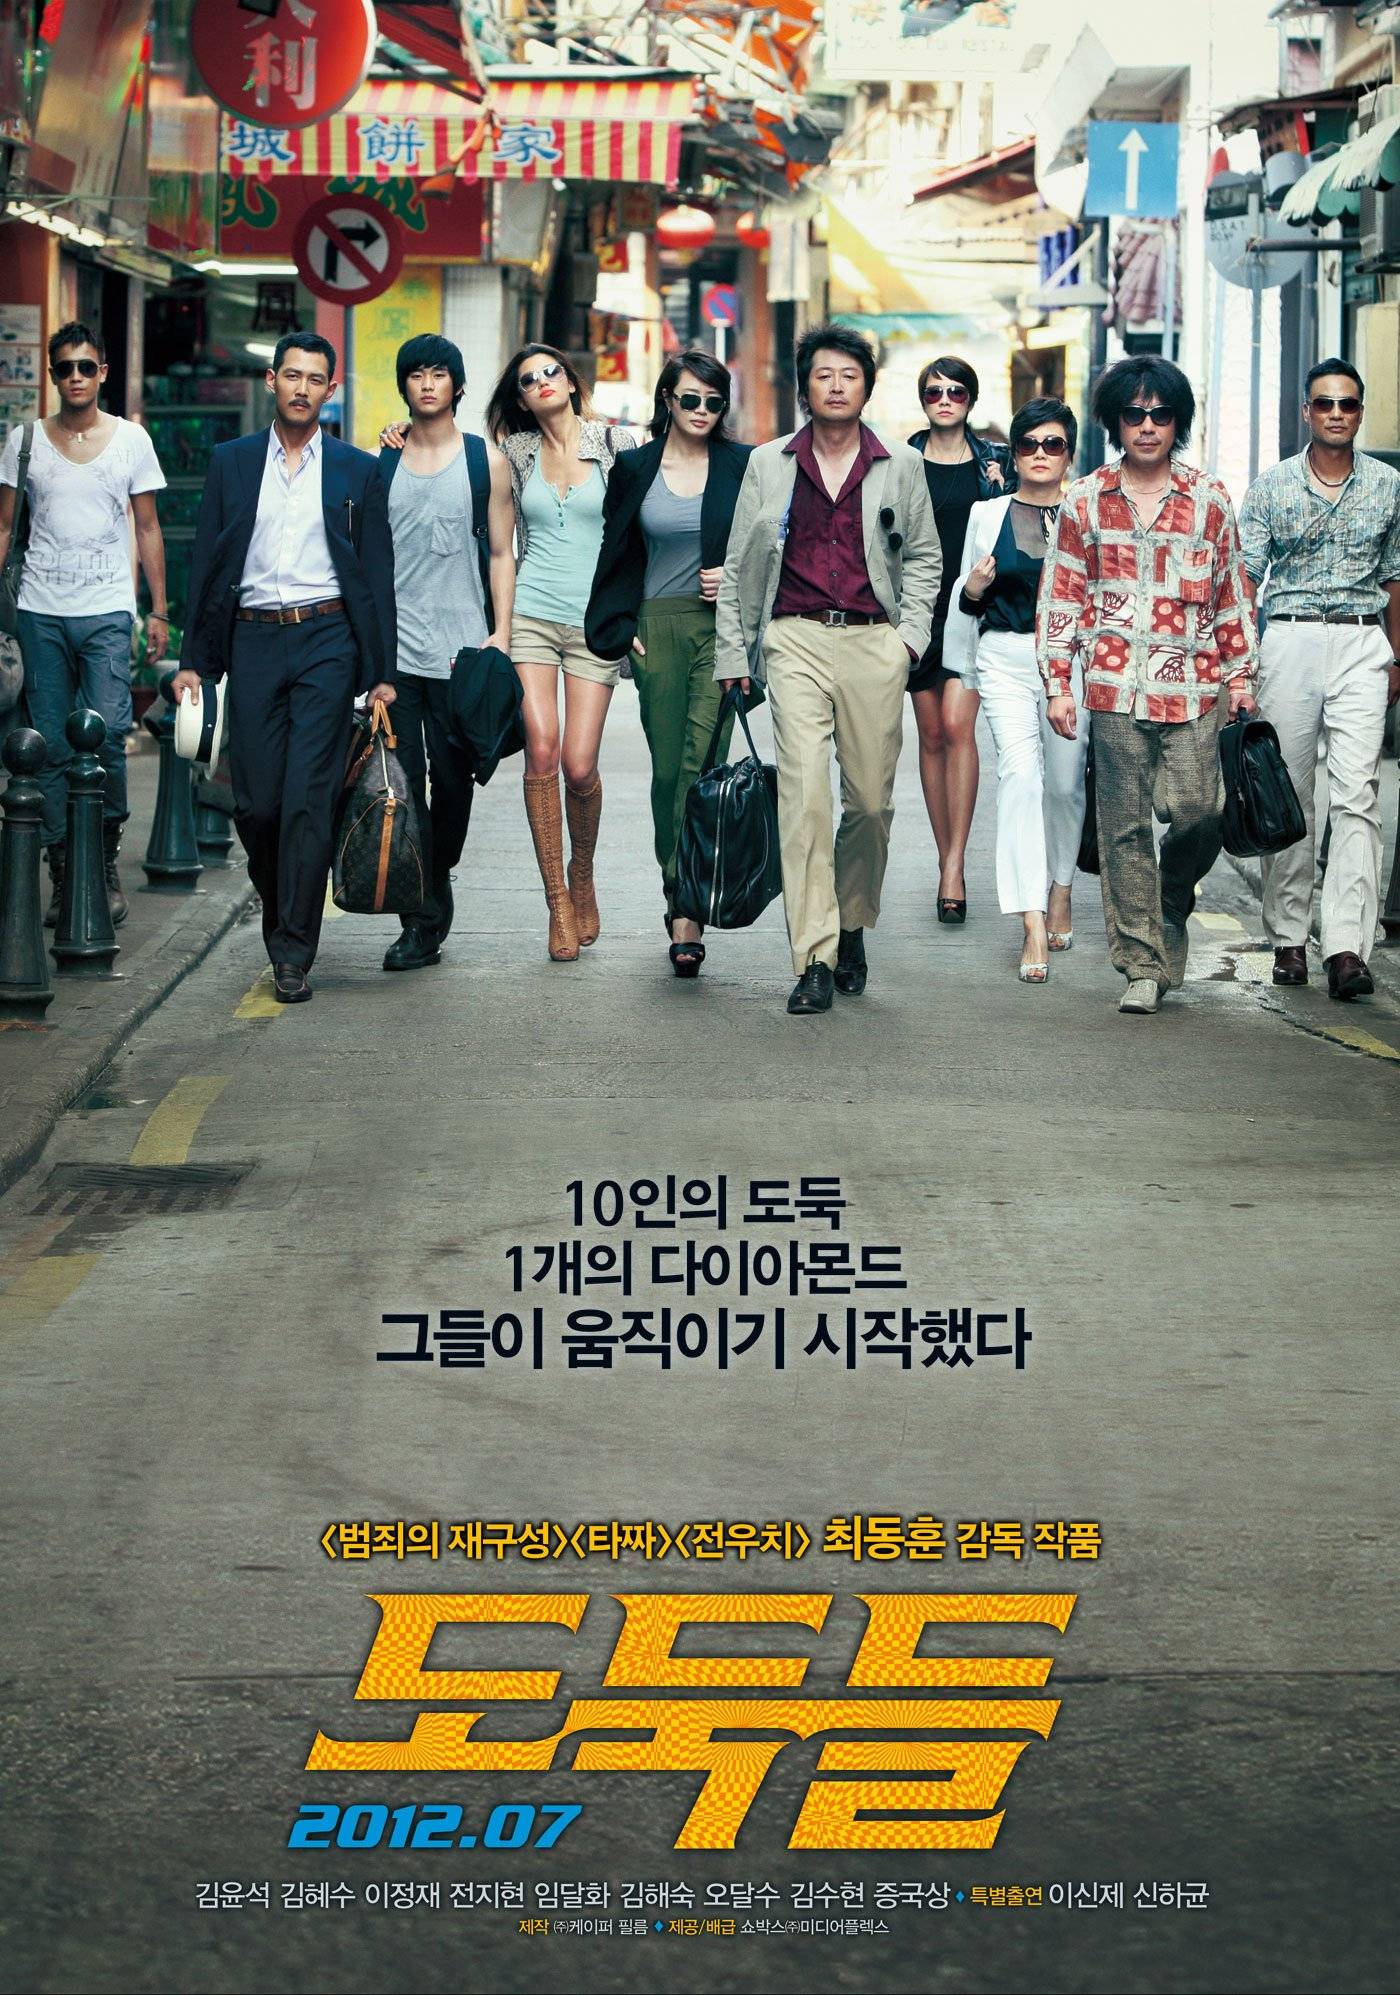 Added new poster for the Korean movie "The Thieves